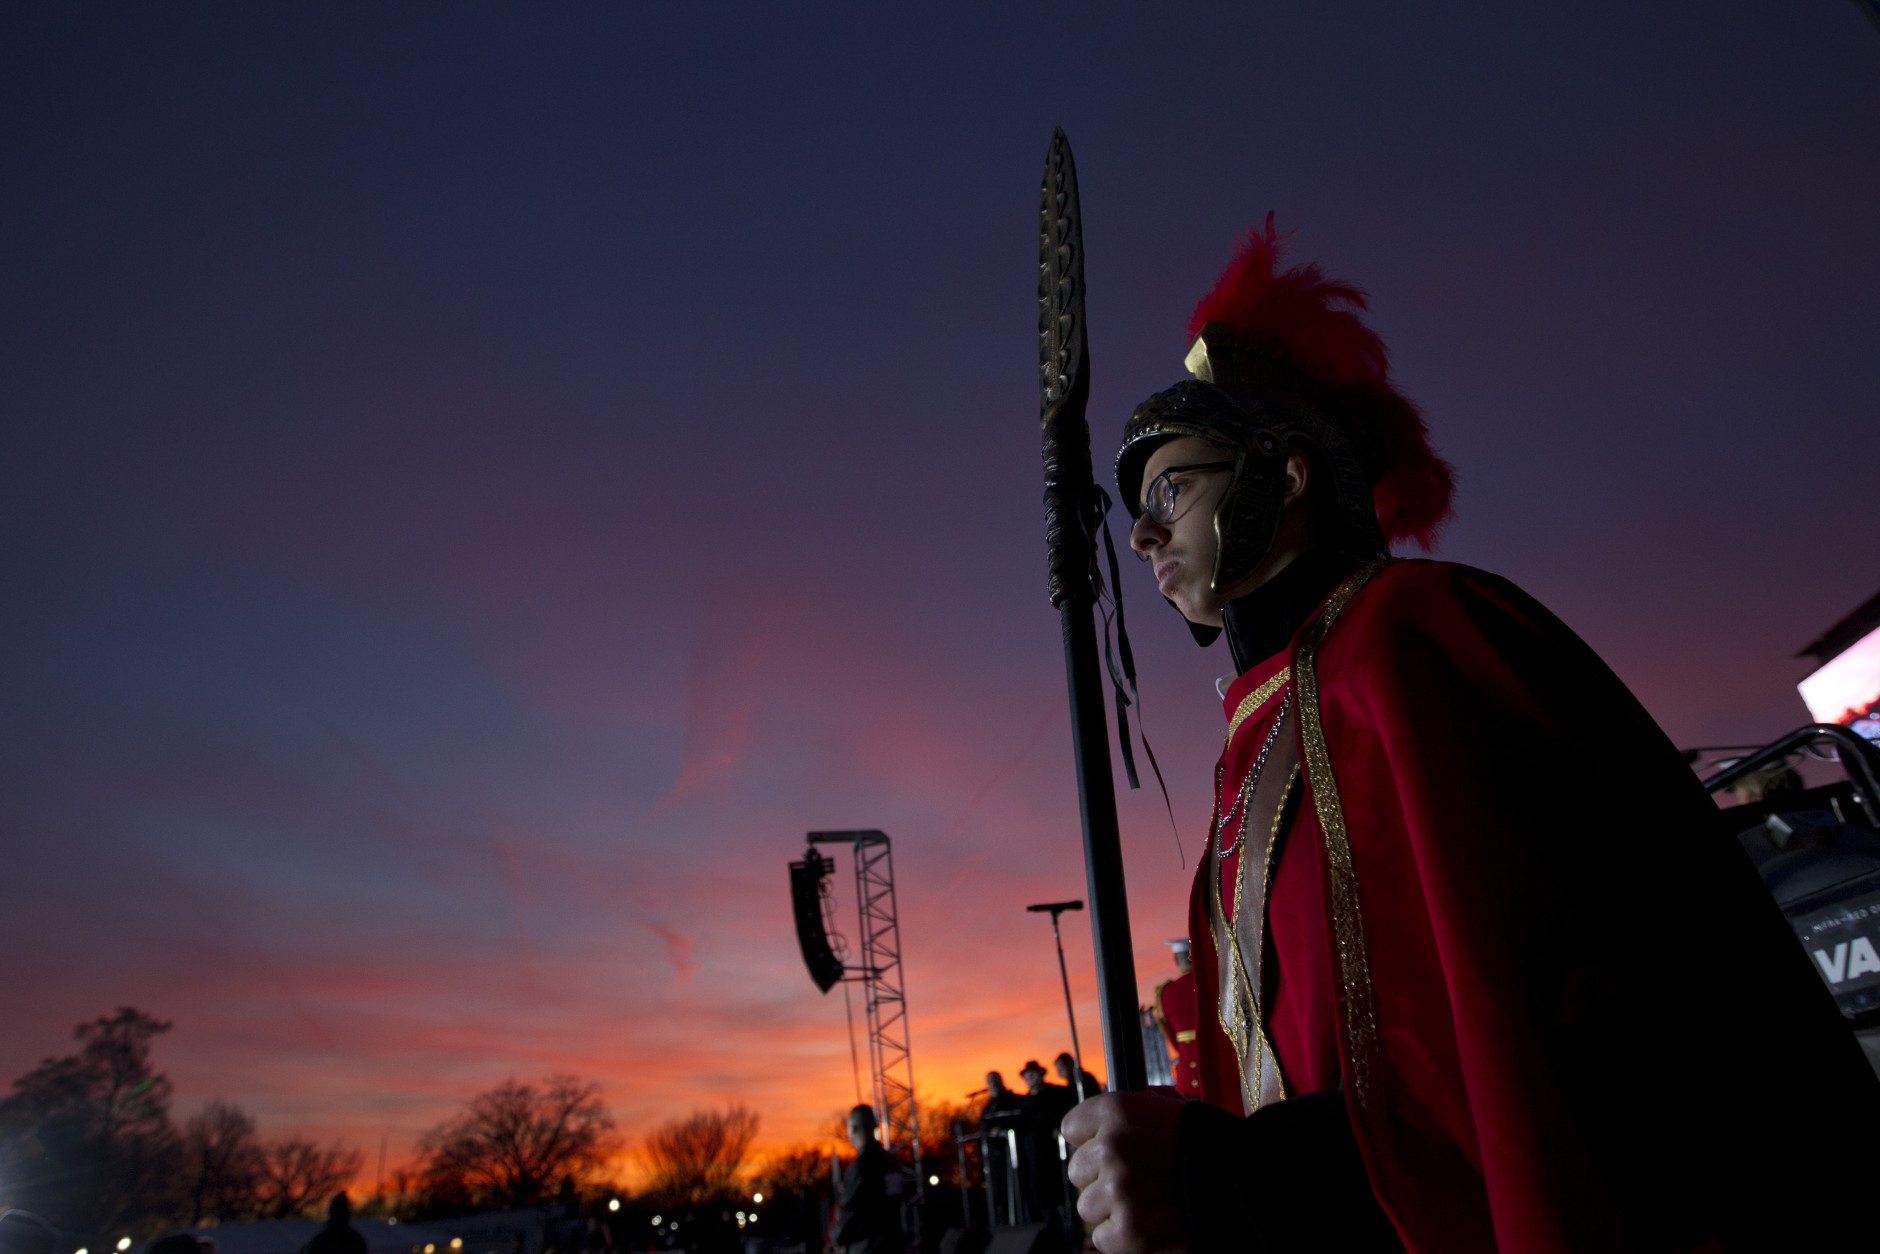 Symbolic maccabi soldier participate in the annual National Menorah Lighting in celebration of Hanukkah, on the Ellipse near the White House in Washington, Sunday, Dec. 6, 2015. (AP Photo/Jose Luis Magana)